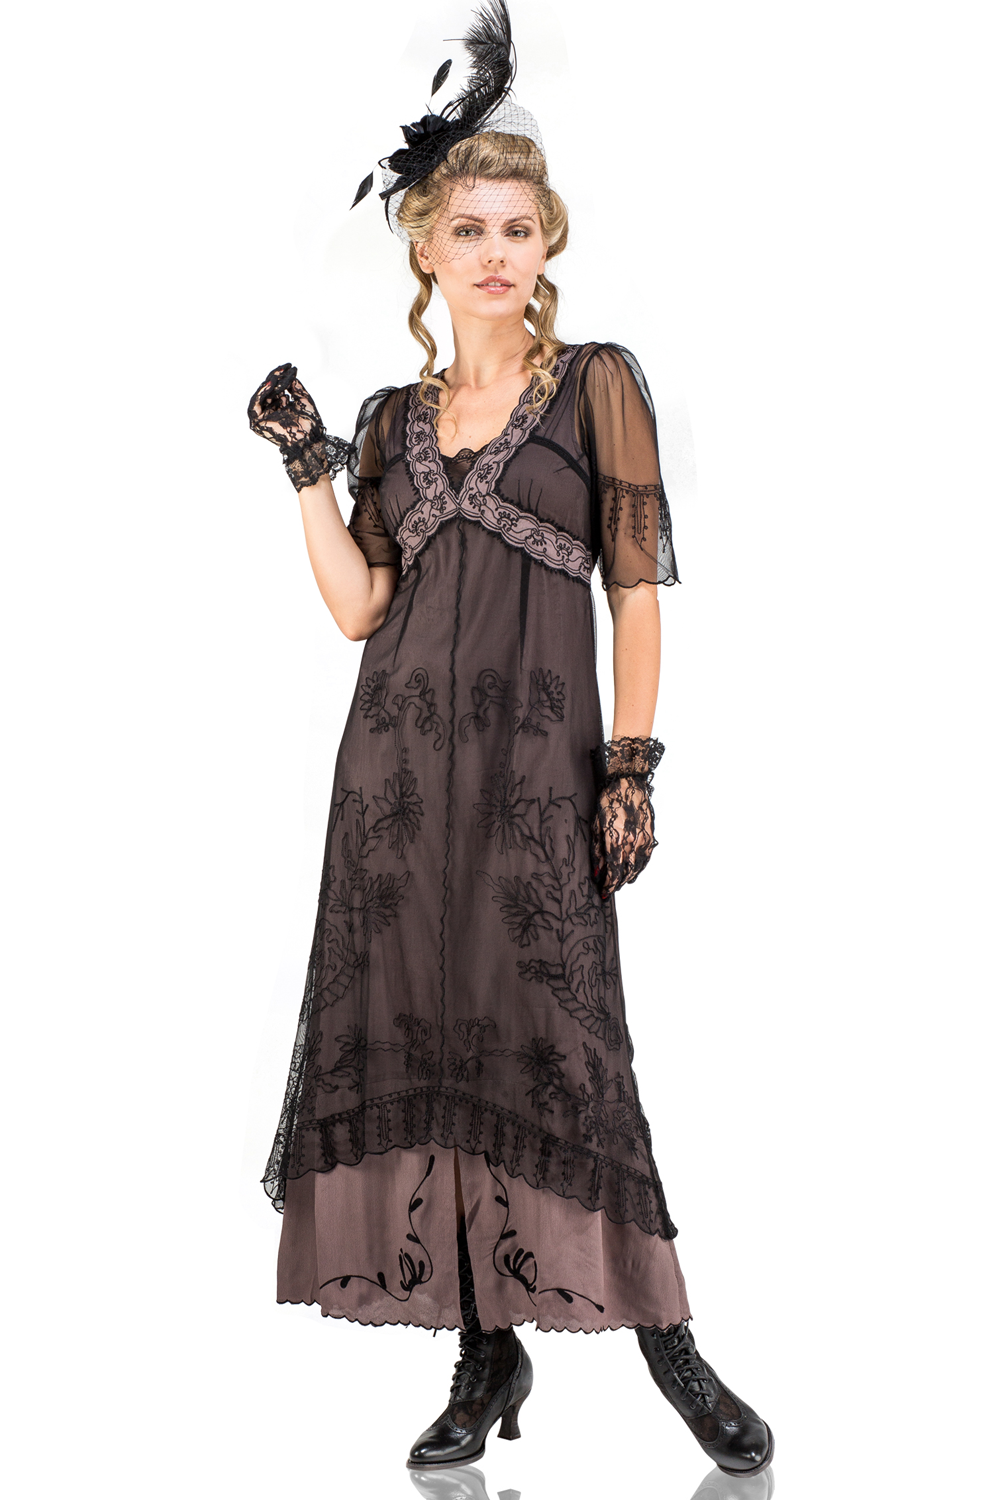 Great Gatsby Dress – Great Gatsby Dresses for Sale New Vintage Titanic Tea Party Dress in Black-Coco by Nataya $249.00 AT vintagedancer.com